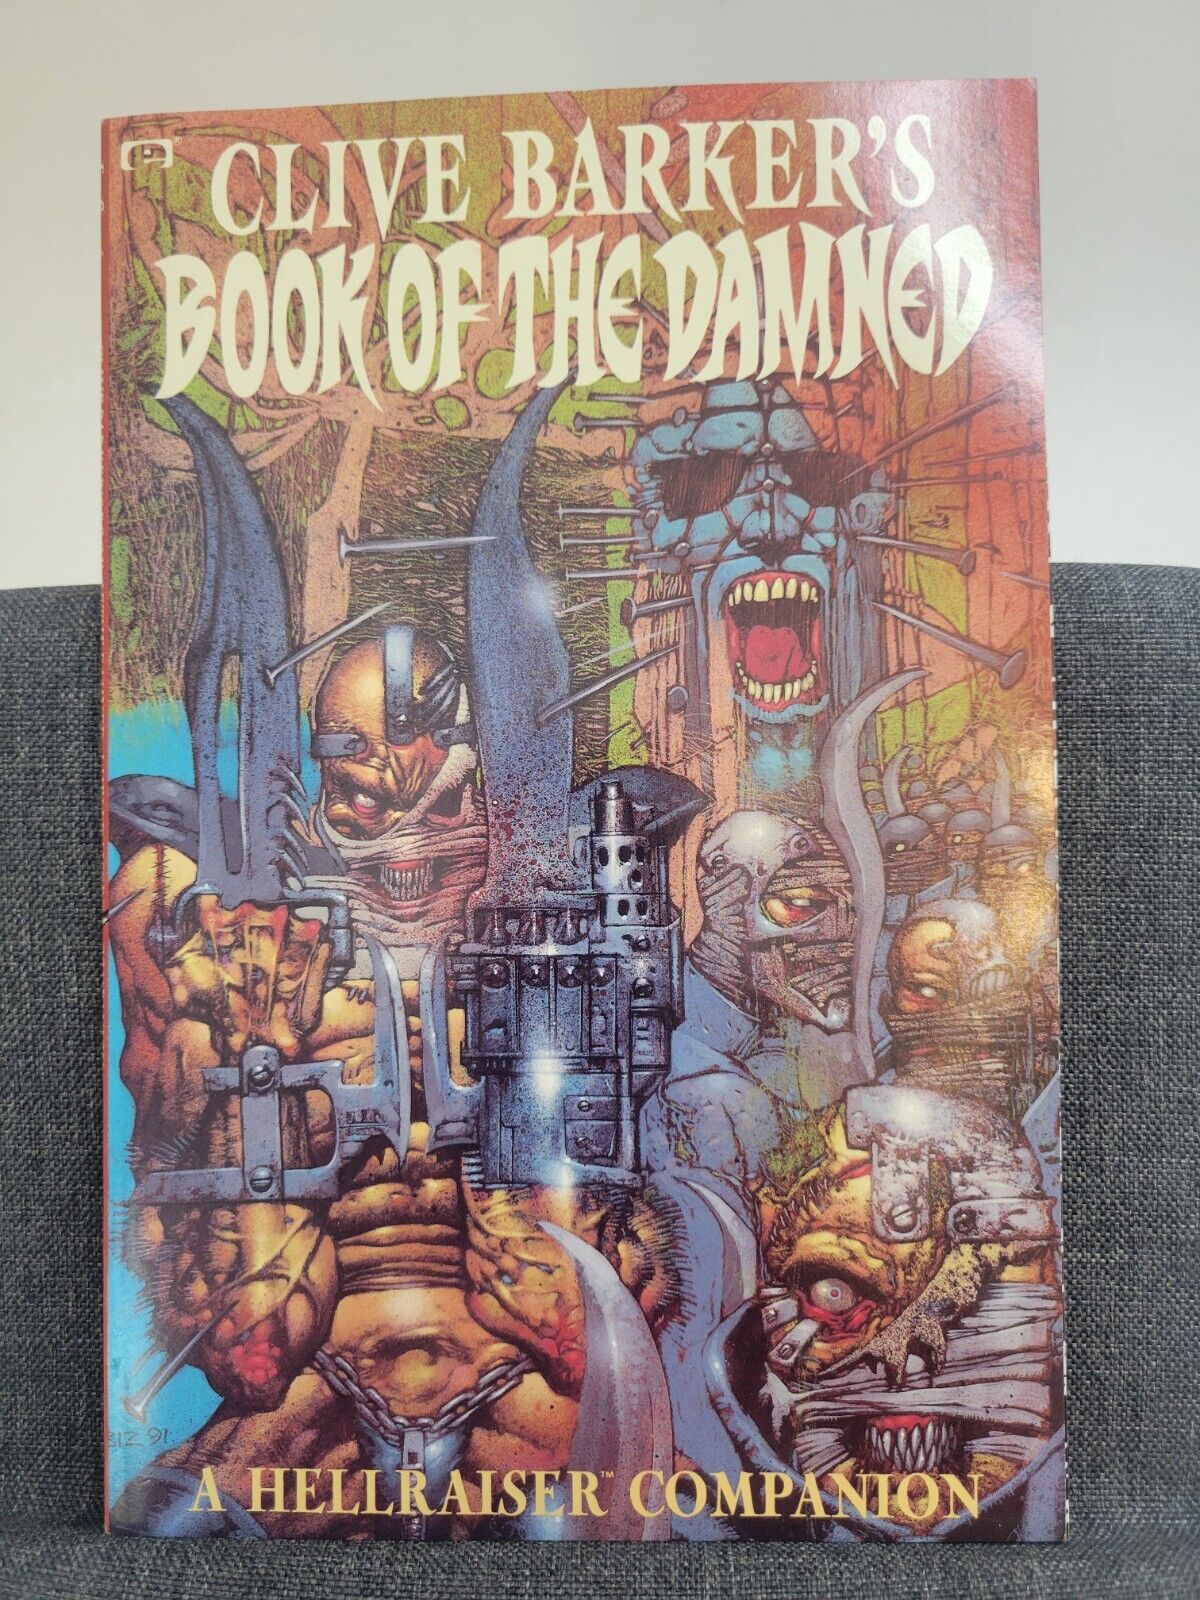 1991 Marvel Epic Clive Barker's Book Of The Damned Hellraiser Companion Vol. #1